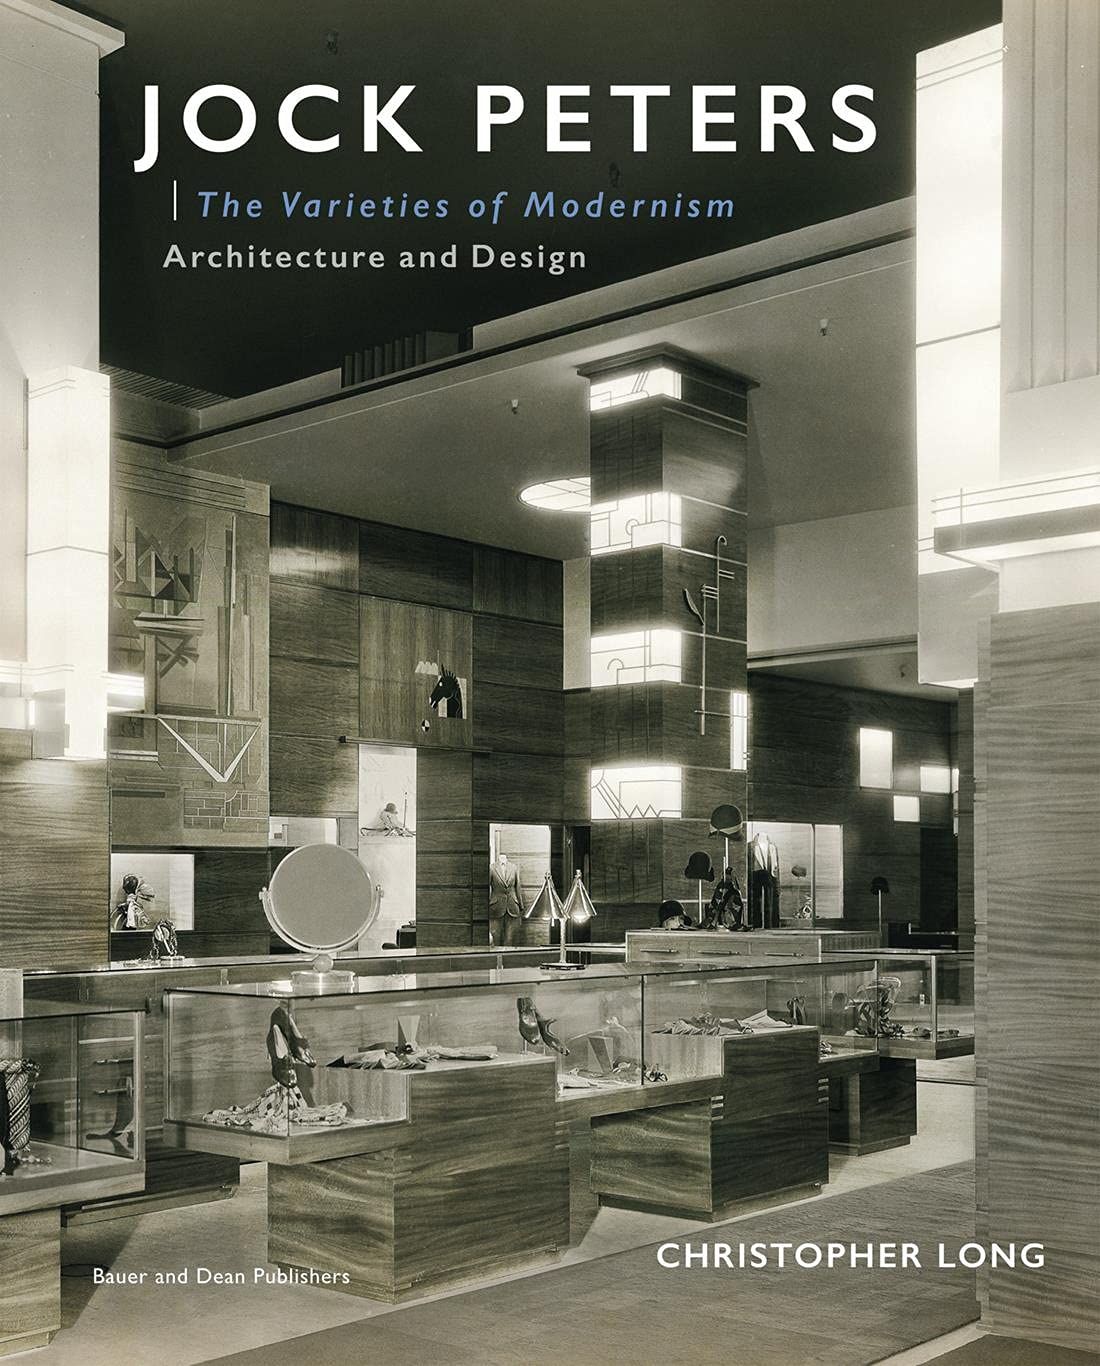  Jock Peters, Architecture and Design : The Varieties of Modernism_Christopher Long_9781735600116_Bauer and Dean Publishers Inc 